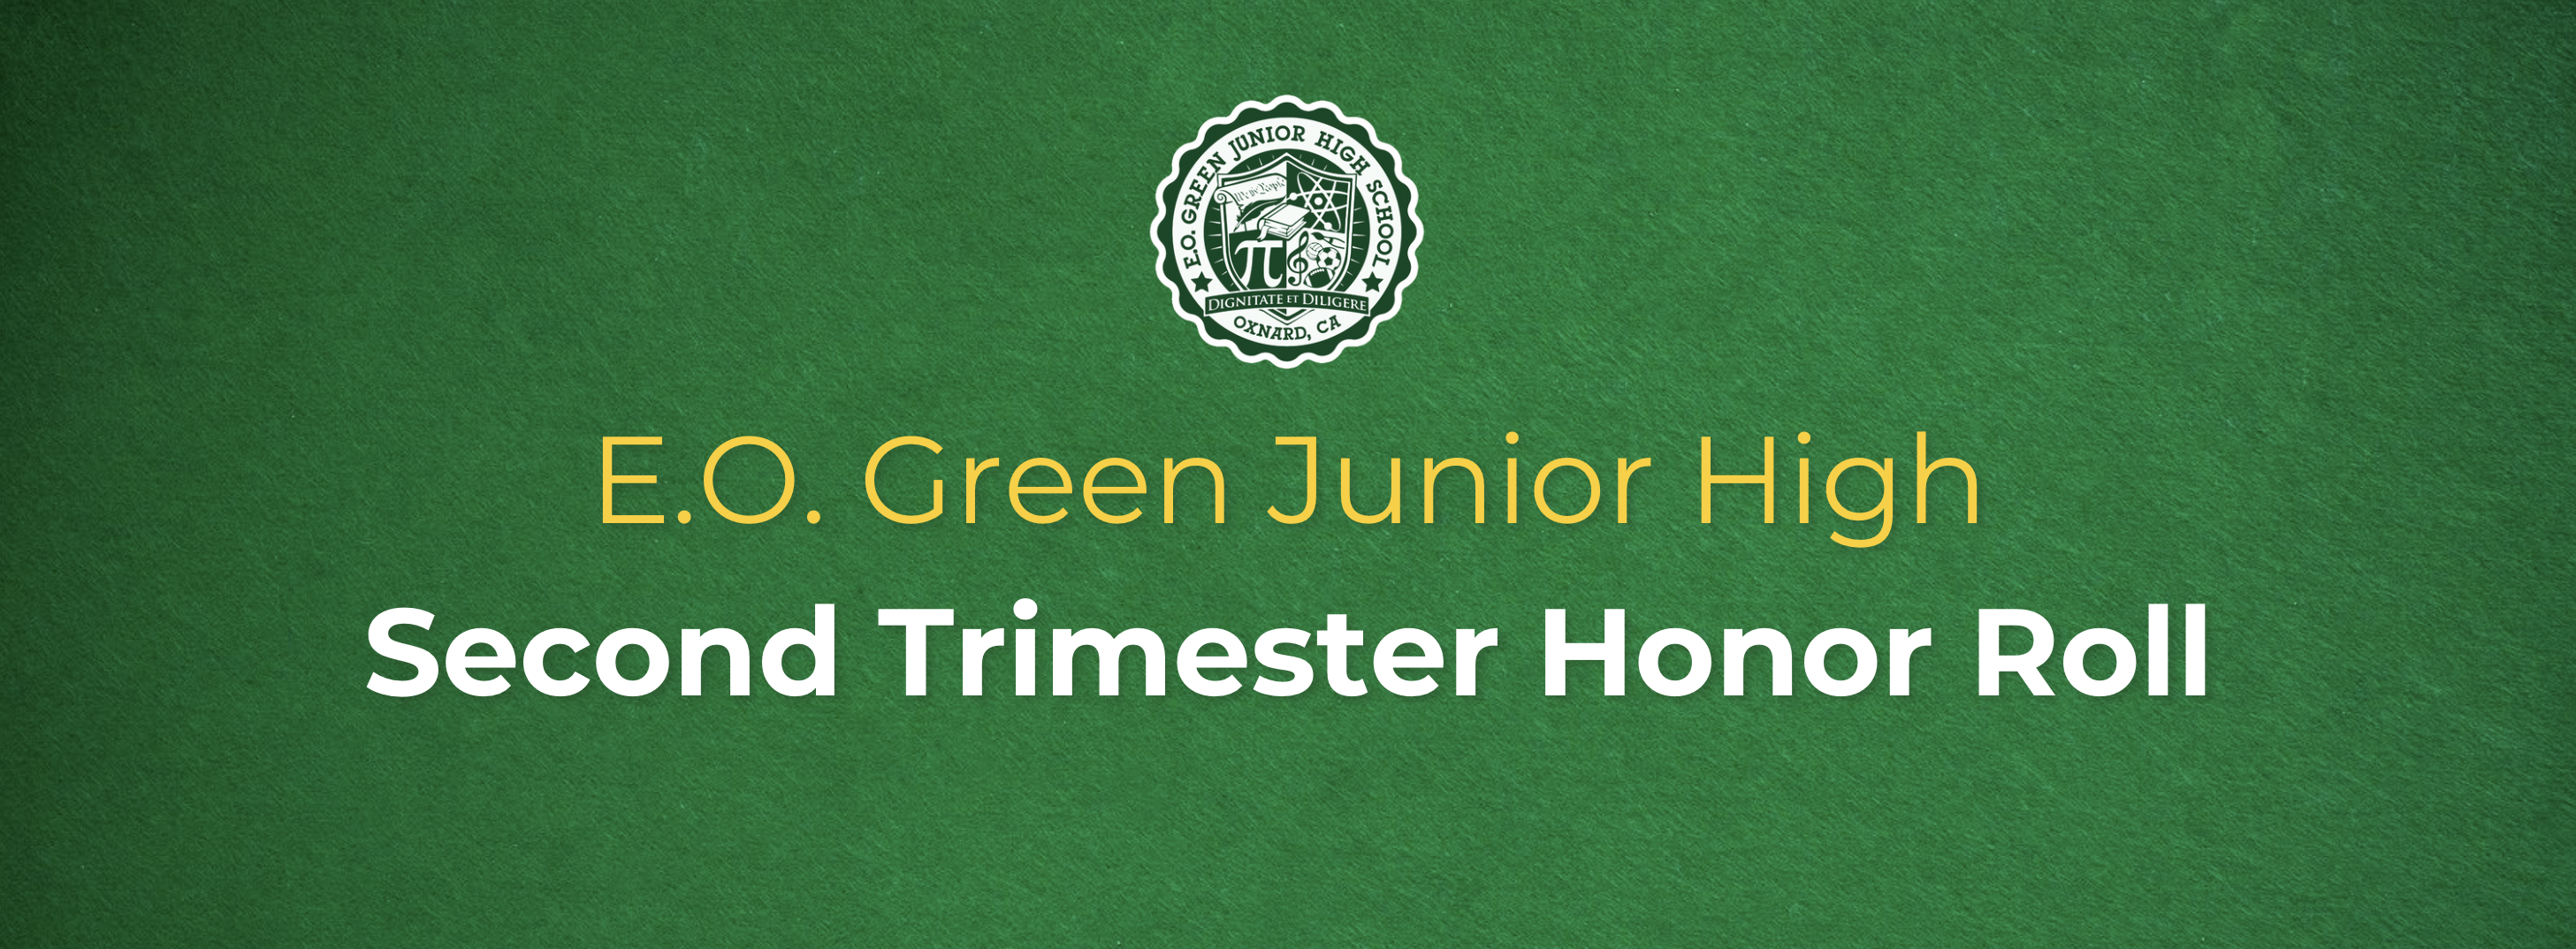 2nd trimester honor roll